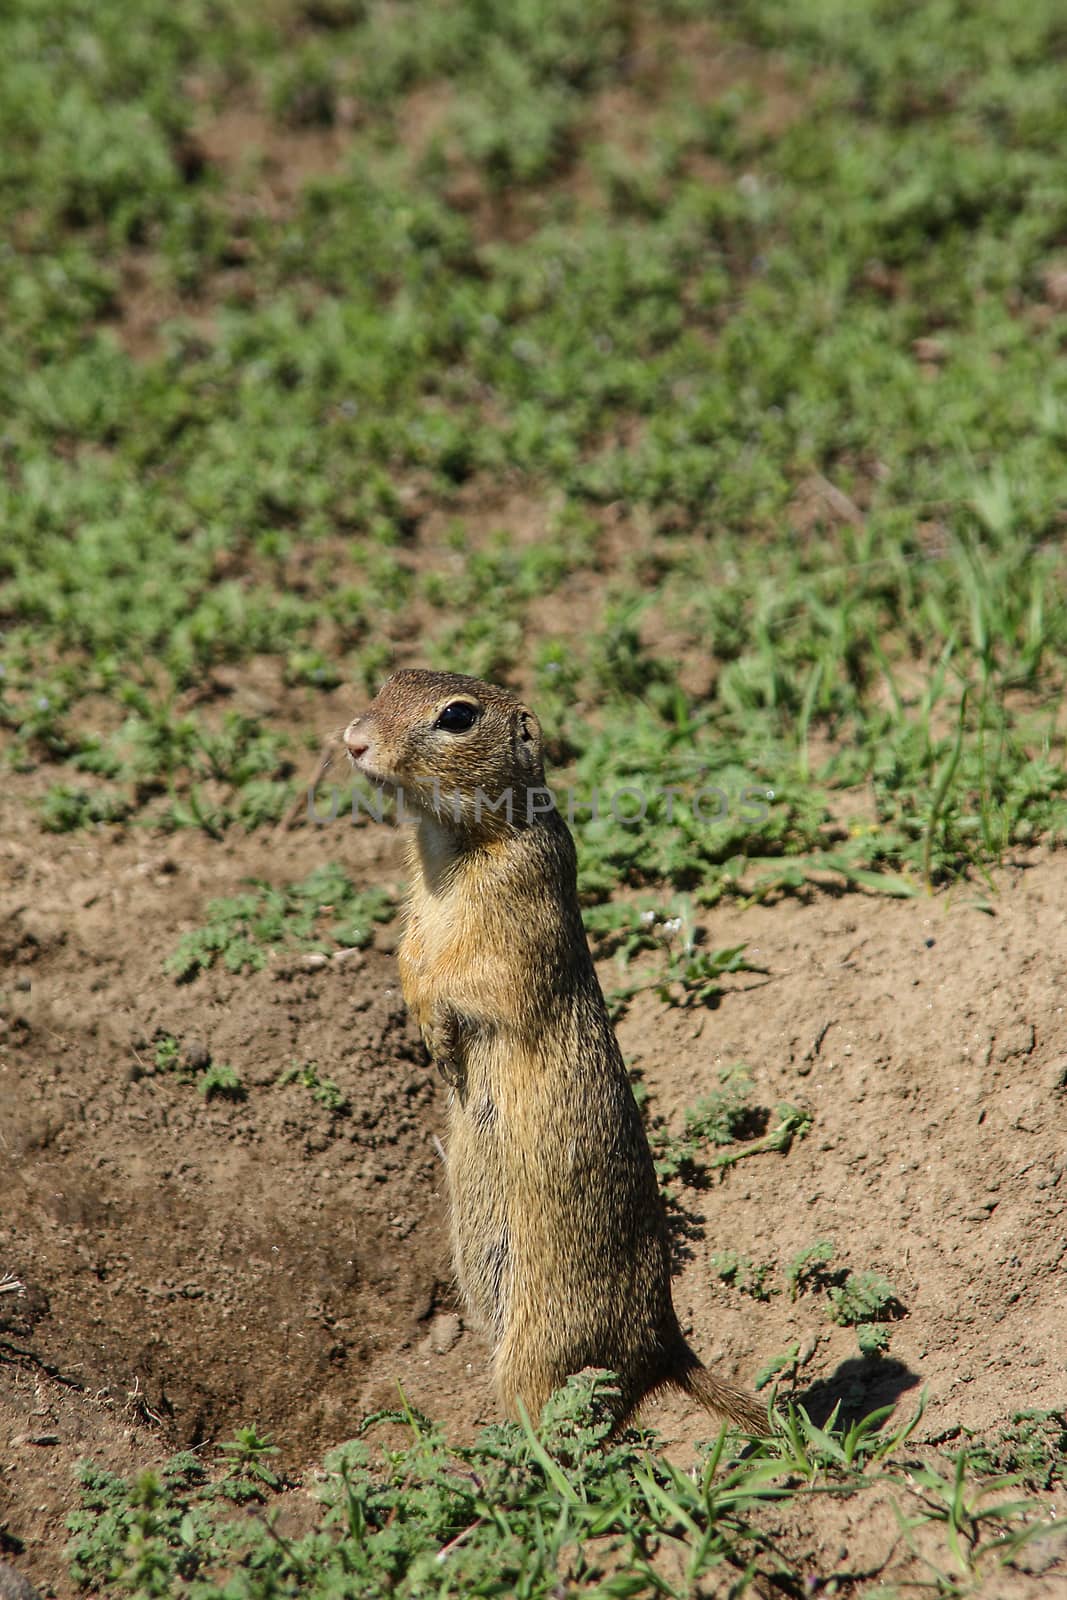 A small rodent - Citellus citellus - in an alert stance next to it's den dug in the soil